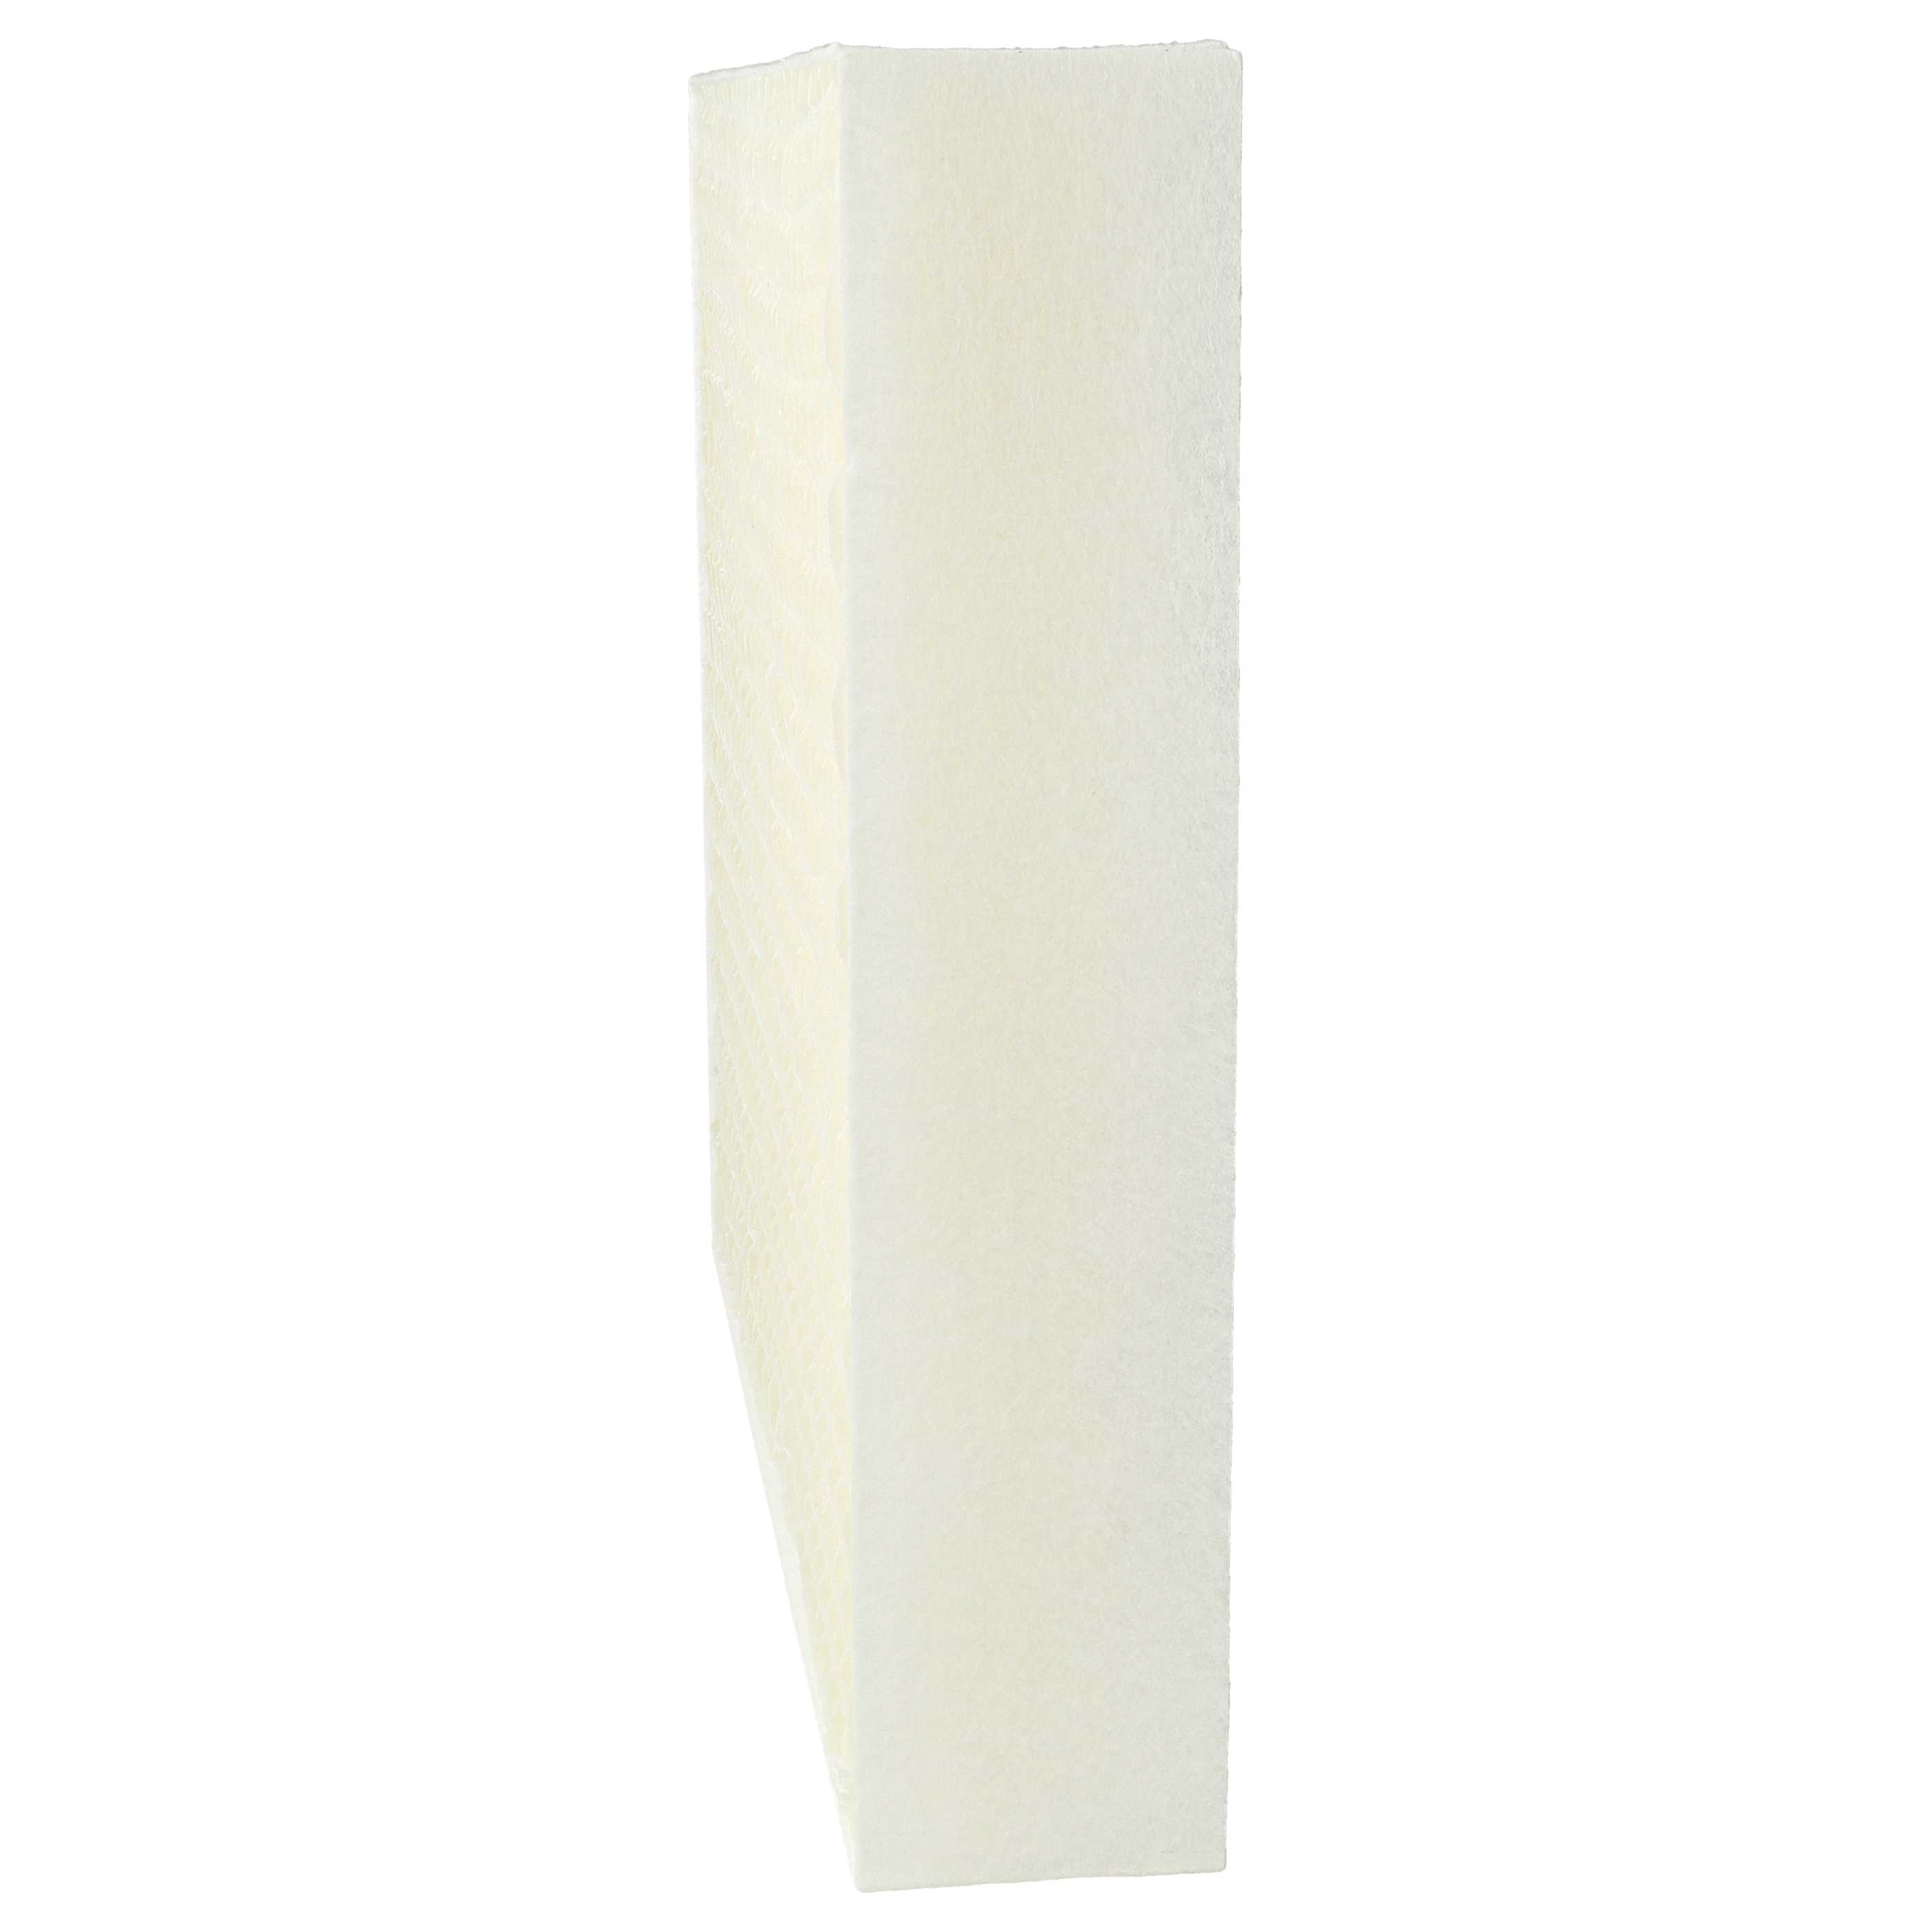 2x Filter replaces Stadler Form 10004, 14643/10 for Humidifier - paper